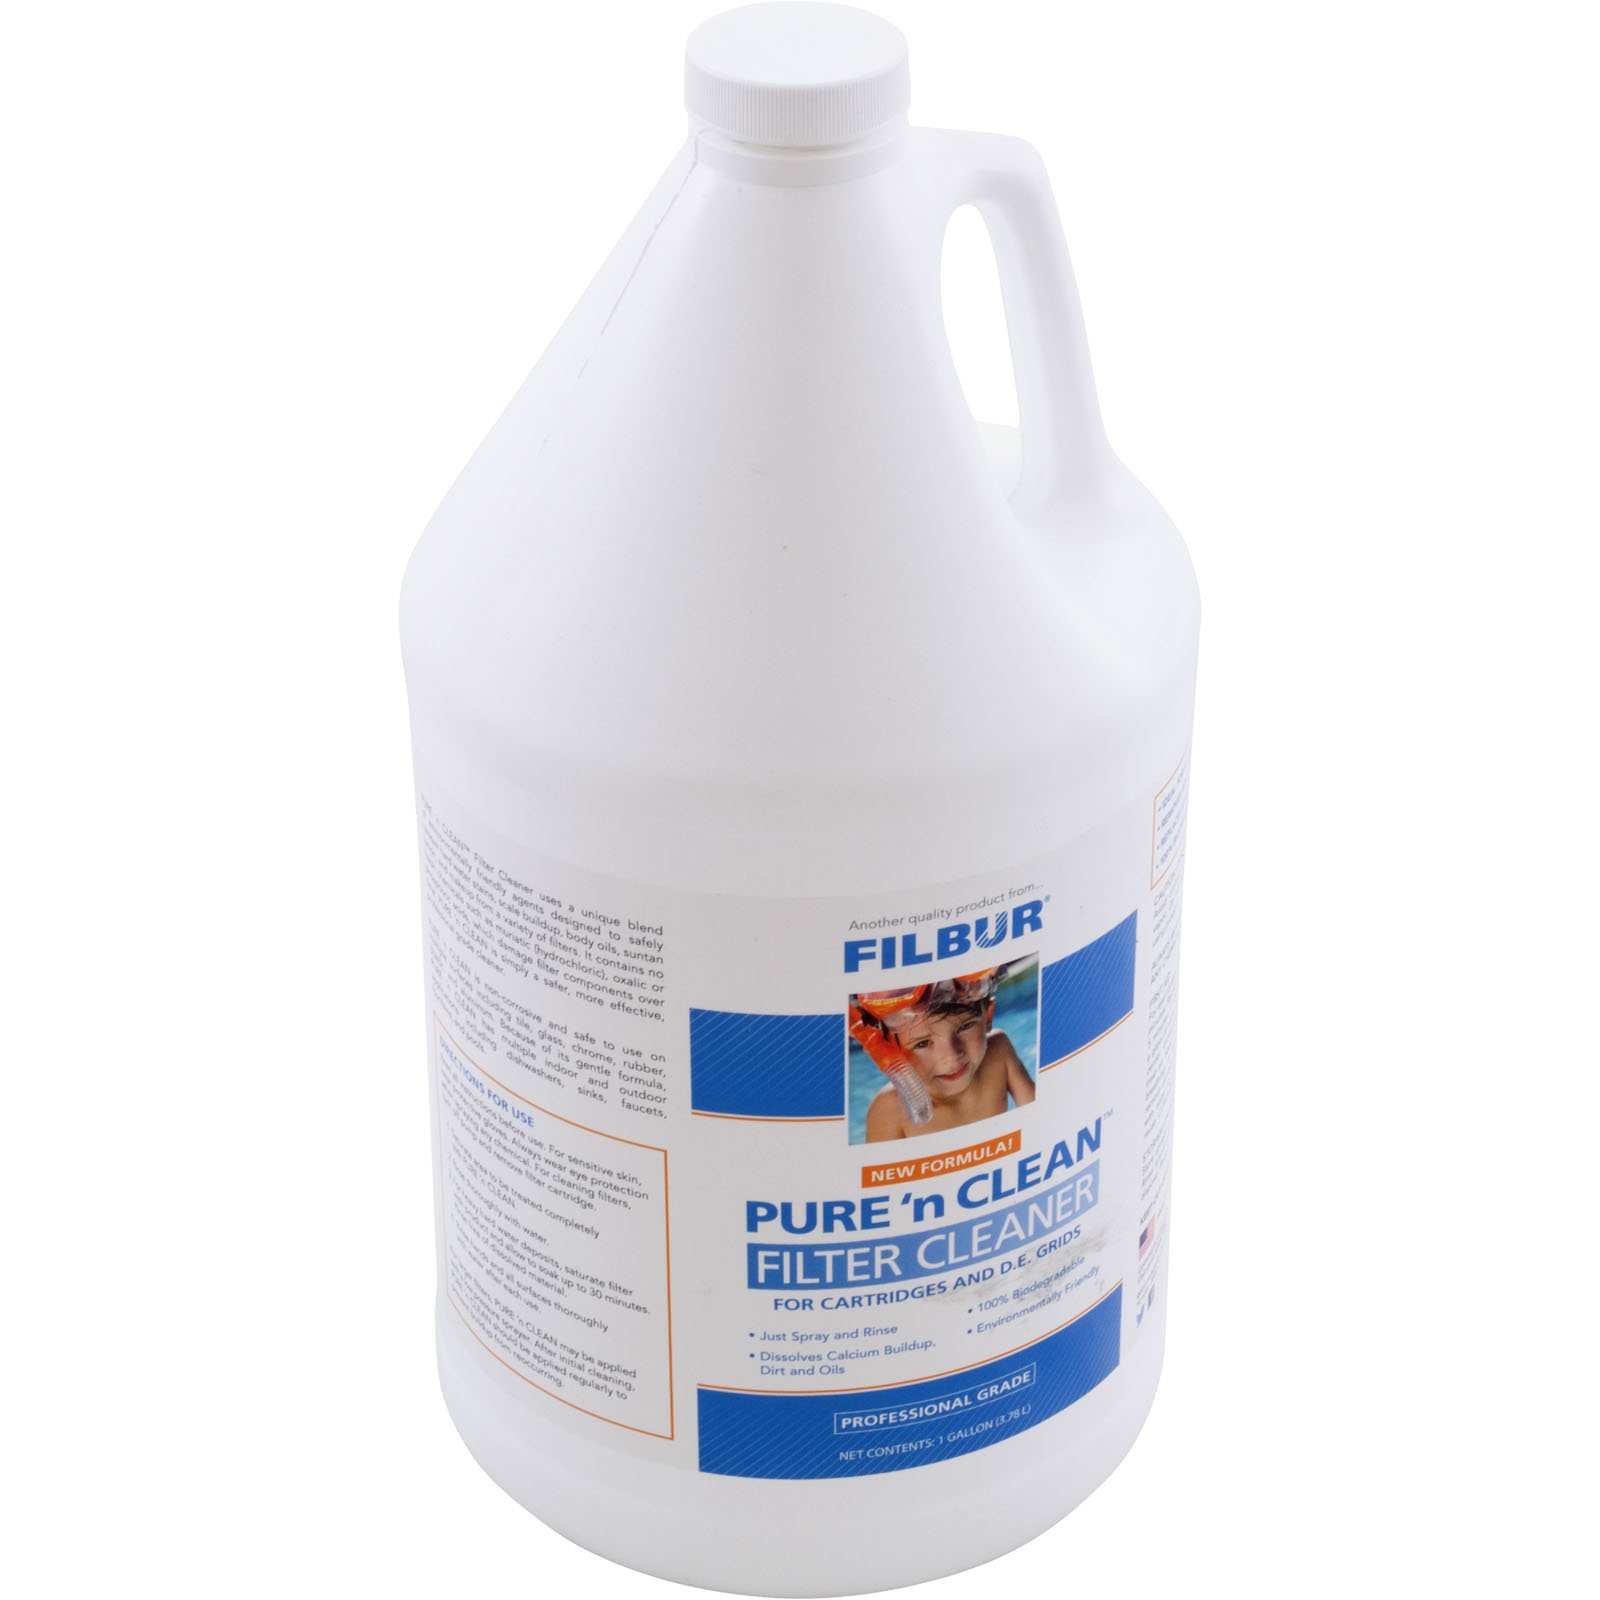 Picture of Cartridge and Grid Cleaner, Filbur, Pure and Clean, 1 Gallon